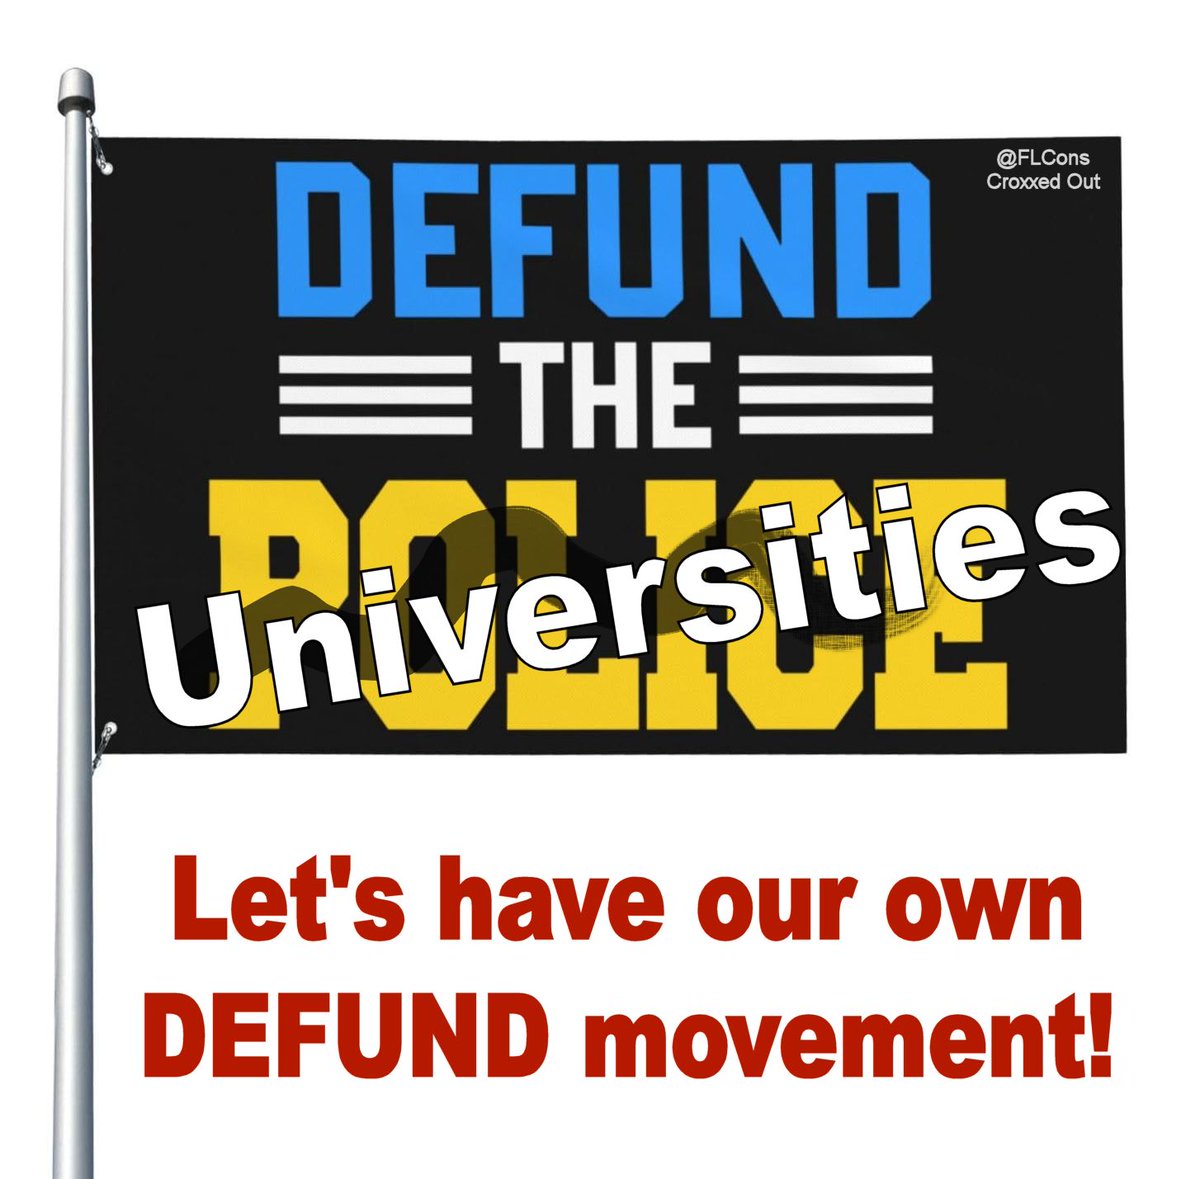 It's becoming quite apparent that the universities have allowed this kind of undercurrent to percolate for years. So should we? Is it time to defund them?